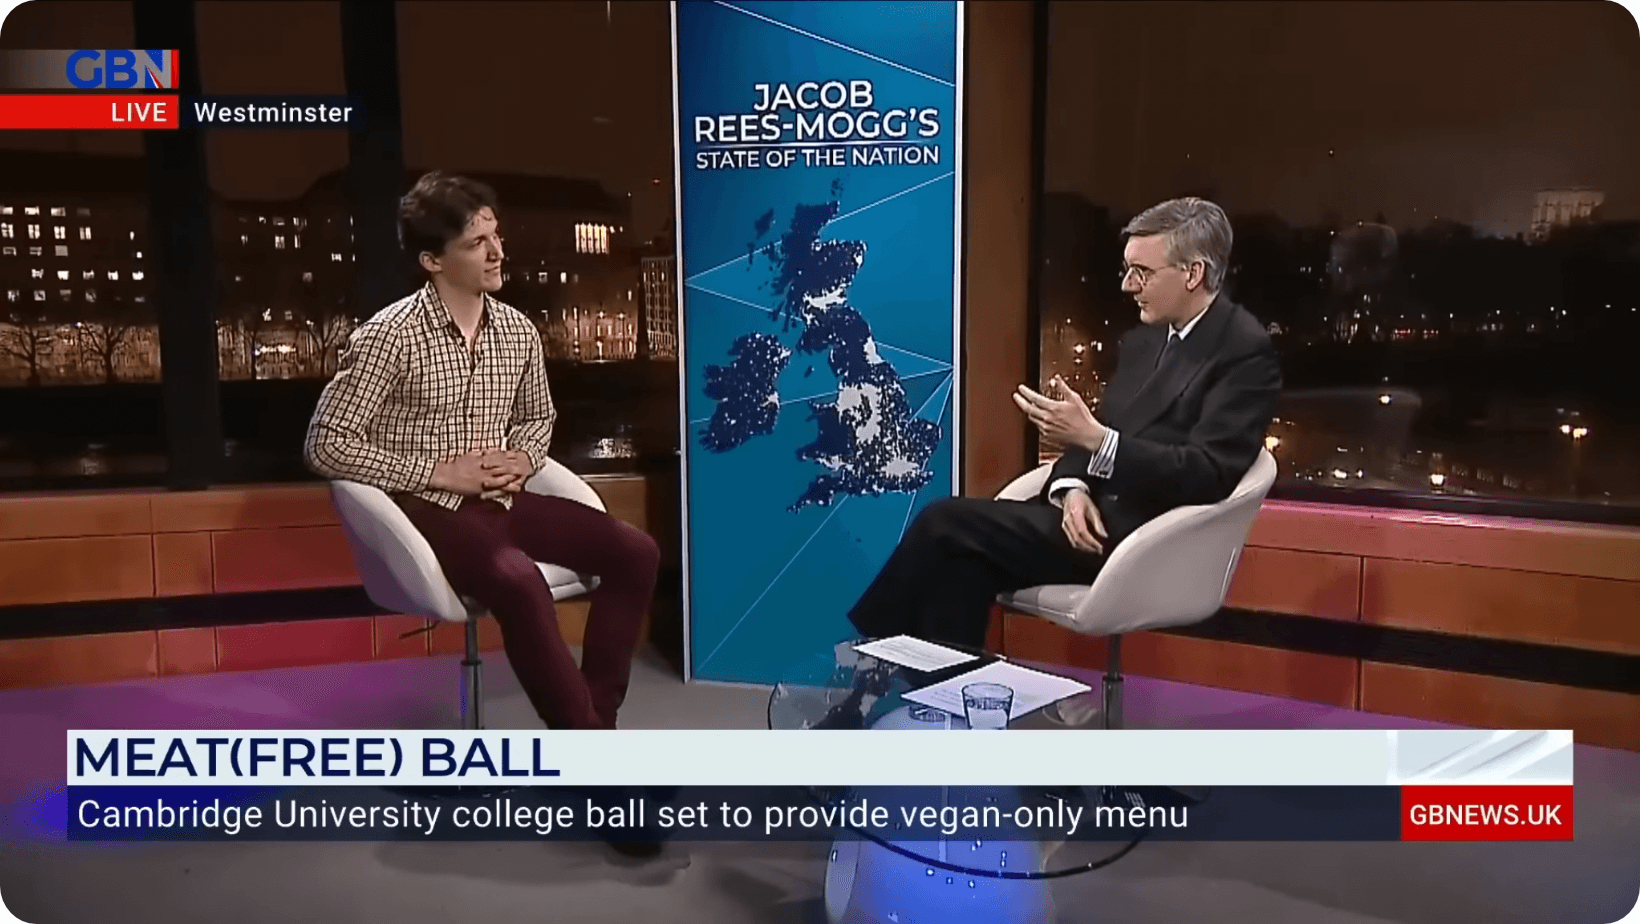 Rory Cockshaw appearing on Jacob Rees-Mogg’s State Of The Nation GB News show